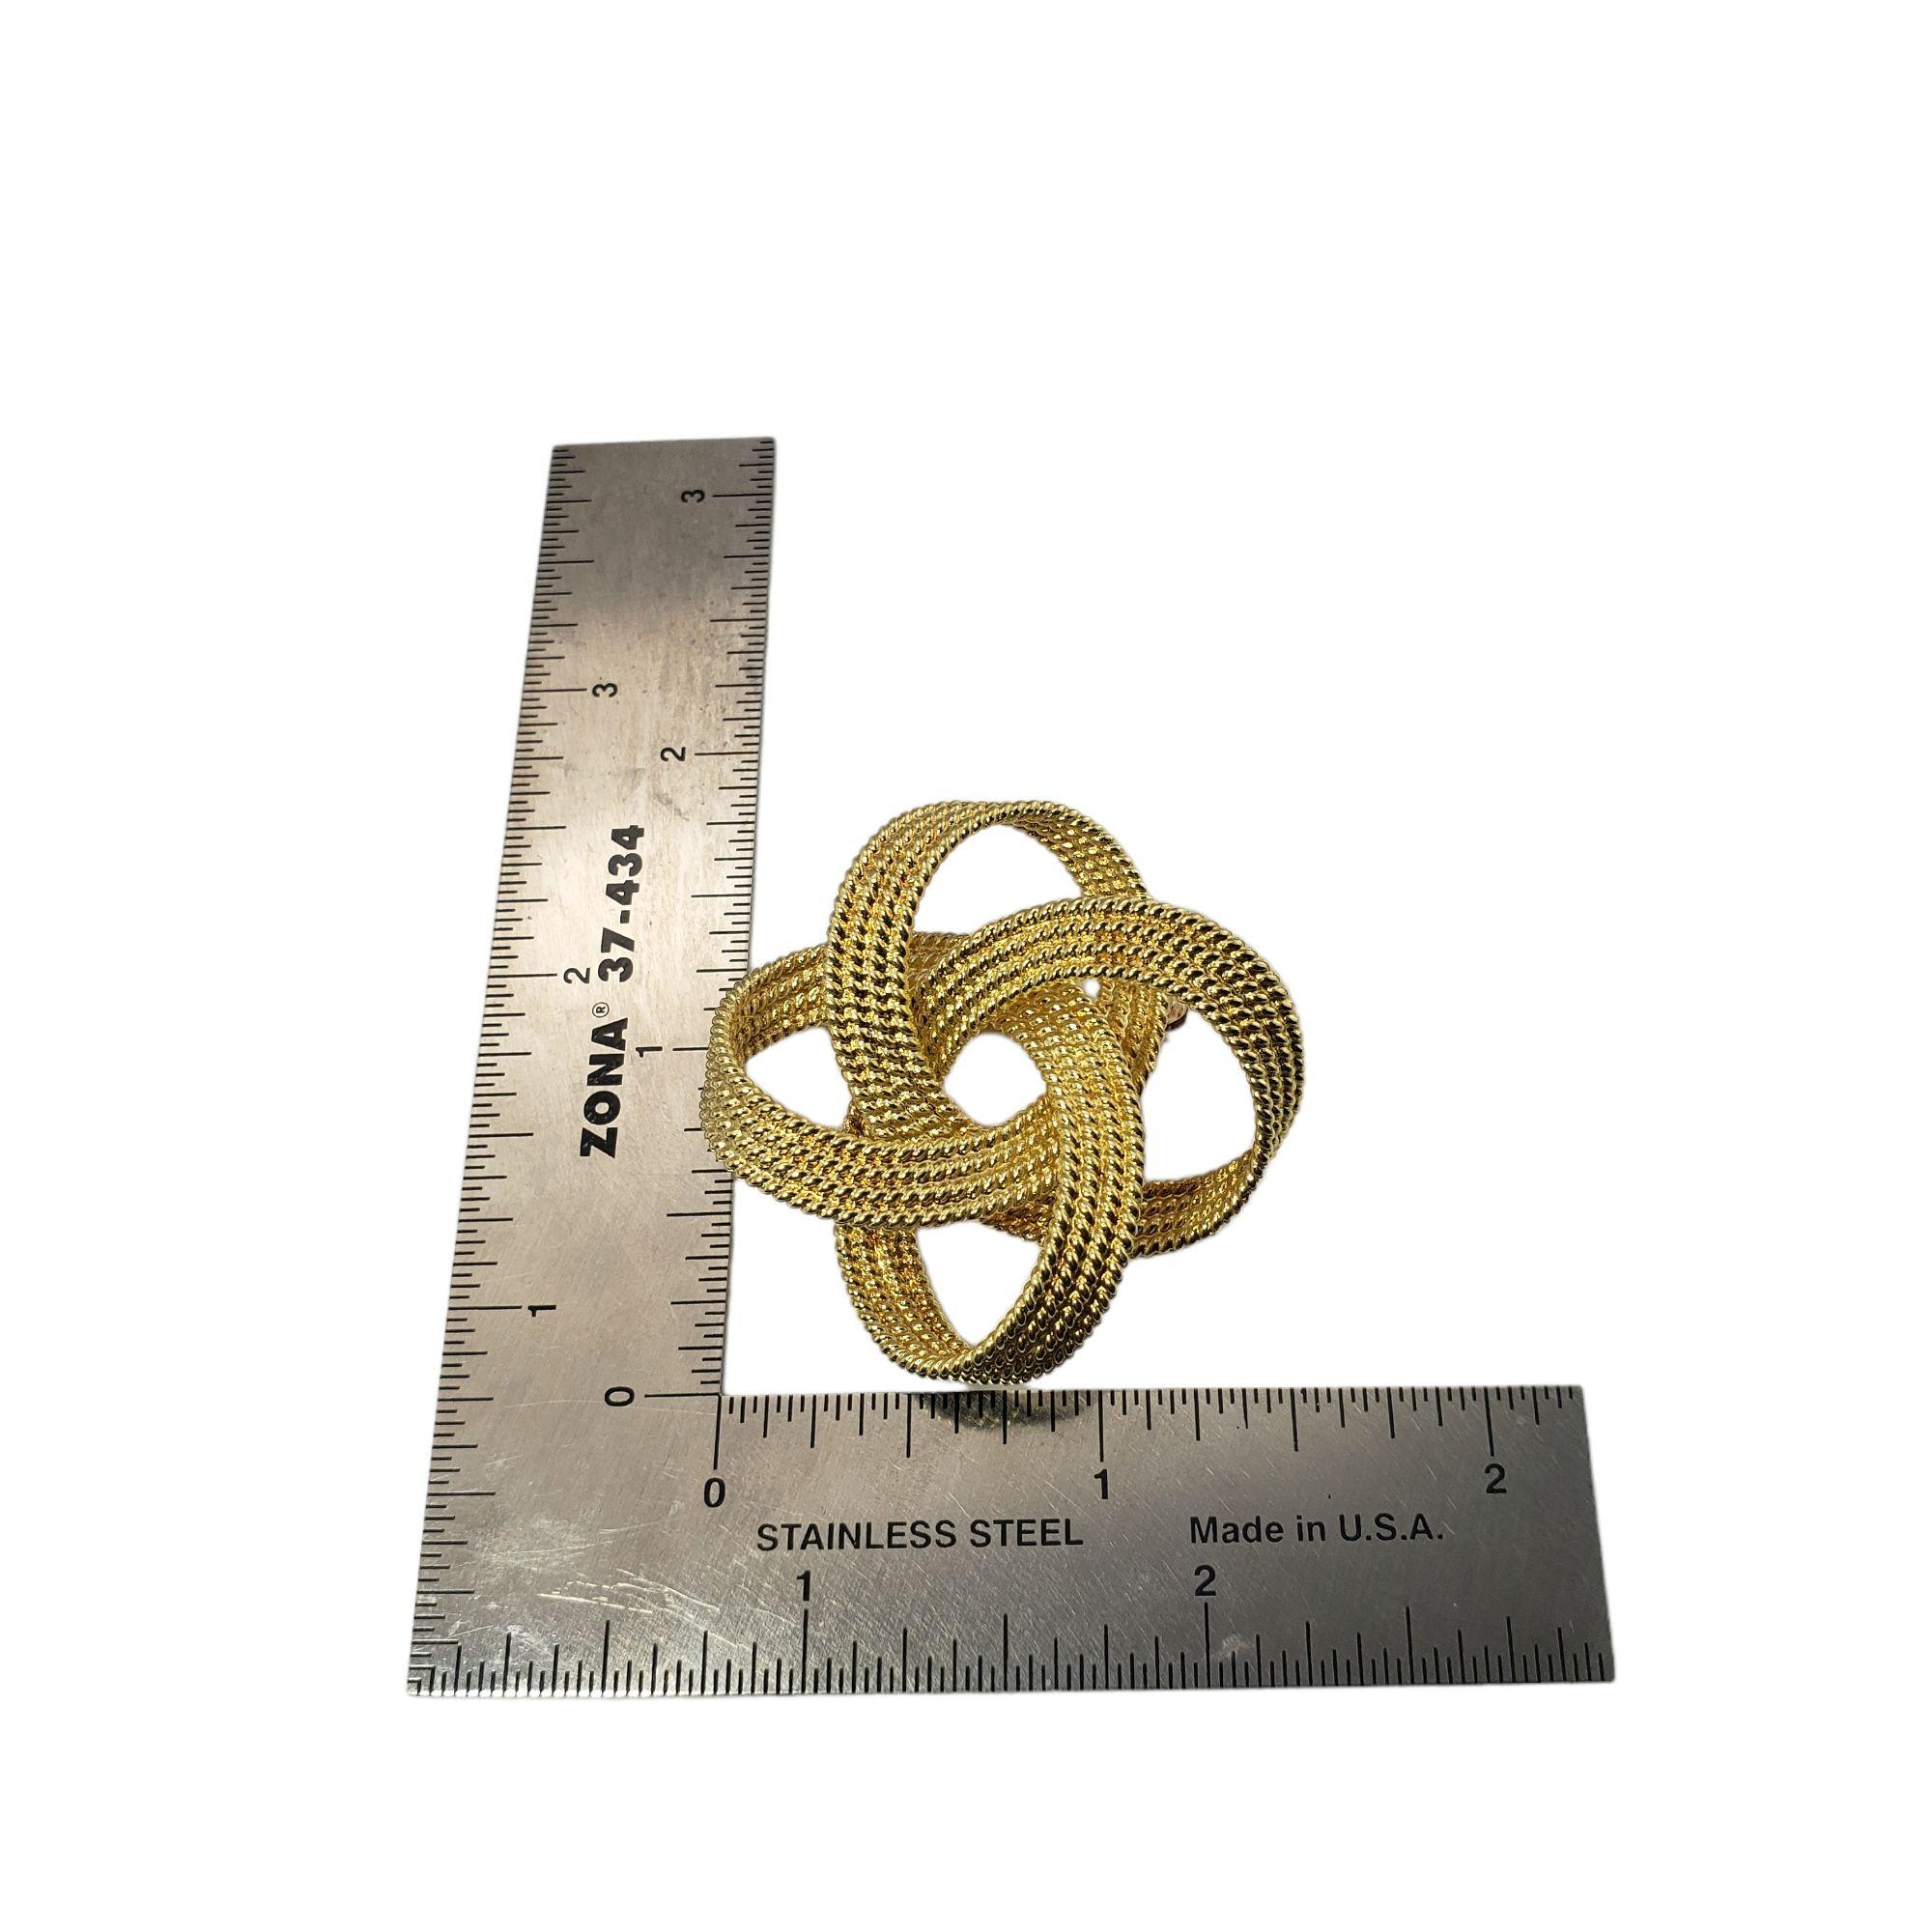 Tiffany & Co. 18 Karat Yellow Gold Knot Brooch / Pin For Sale 2